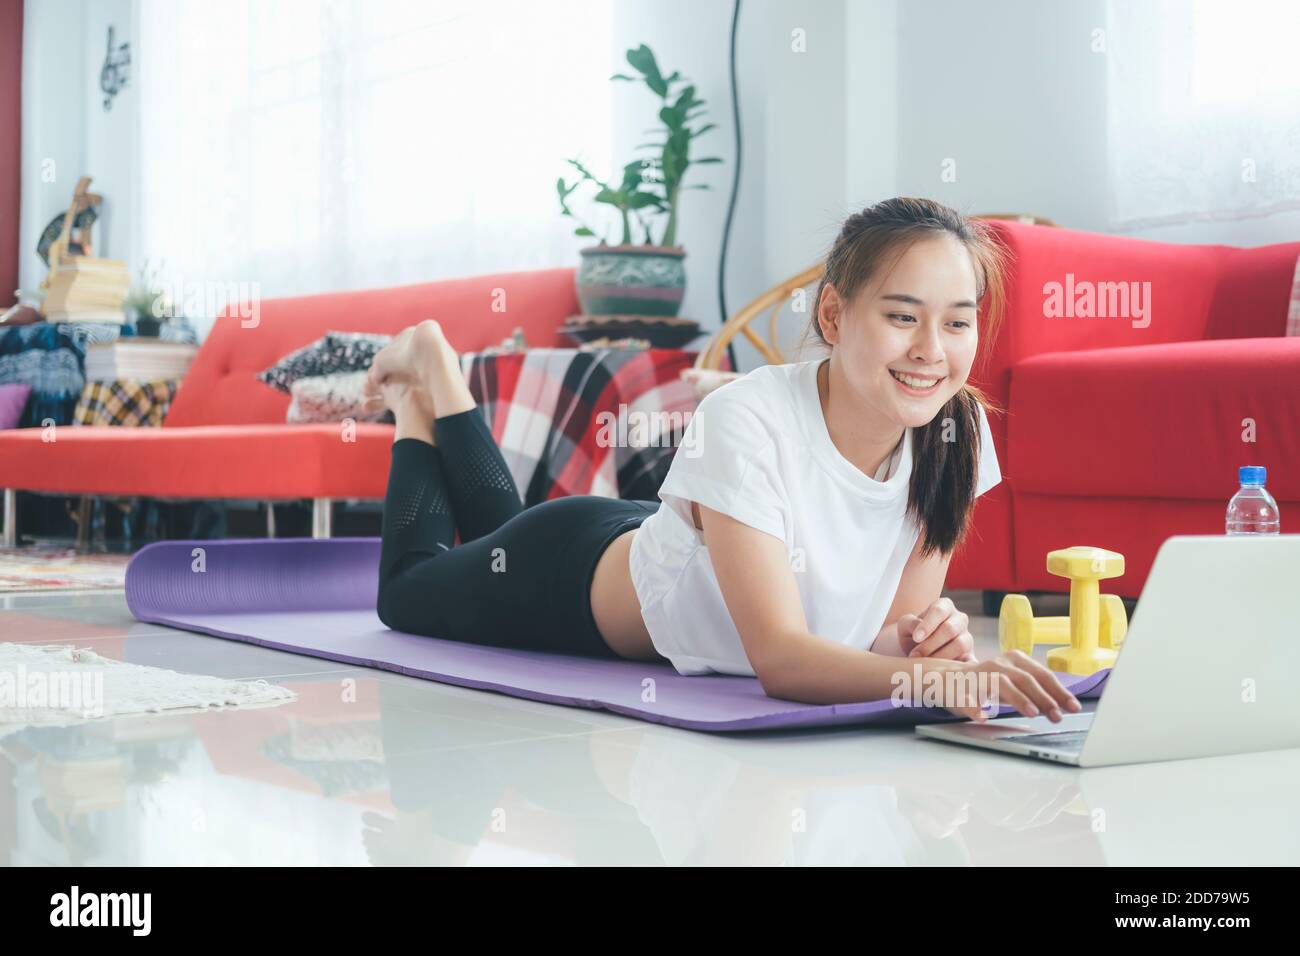 Happy woman open online tutorial on computer laptop for her exercise at home in livingroom. Stay at home and healthy lifestyle. Stock Photo